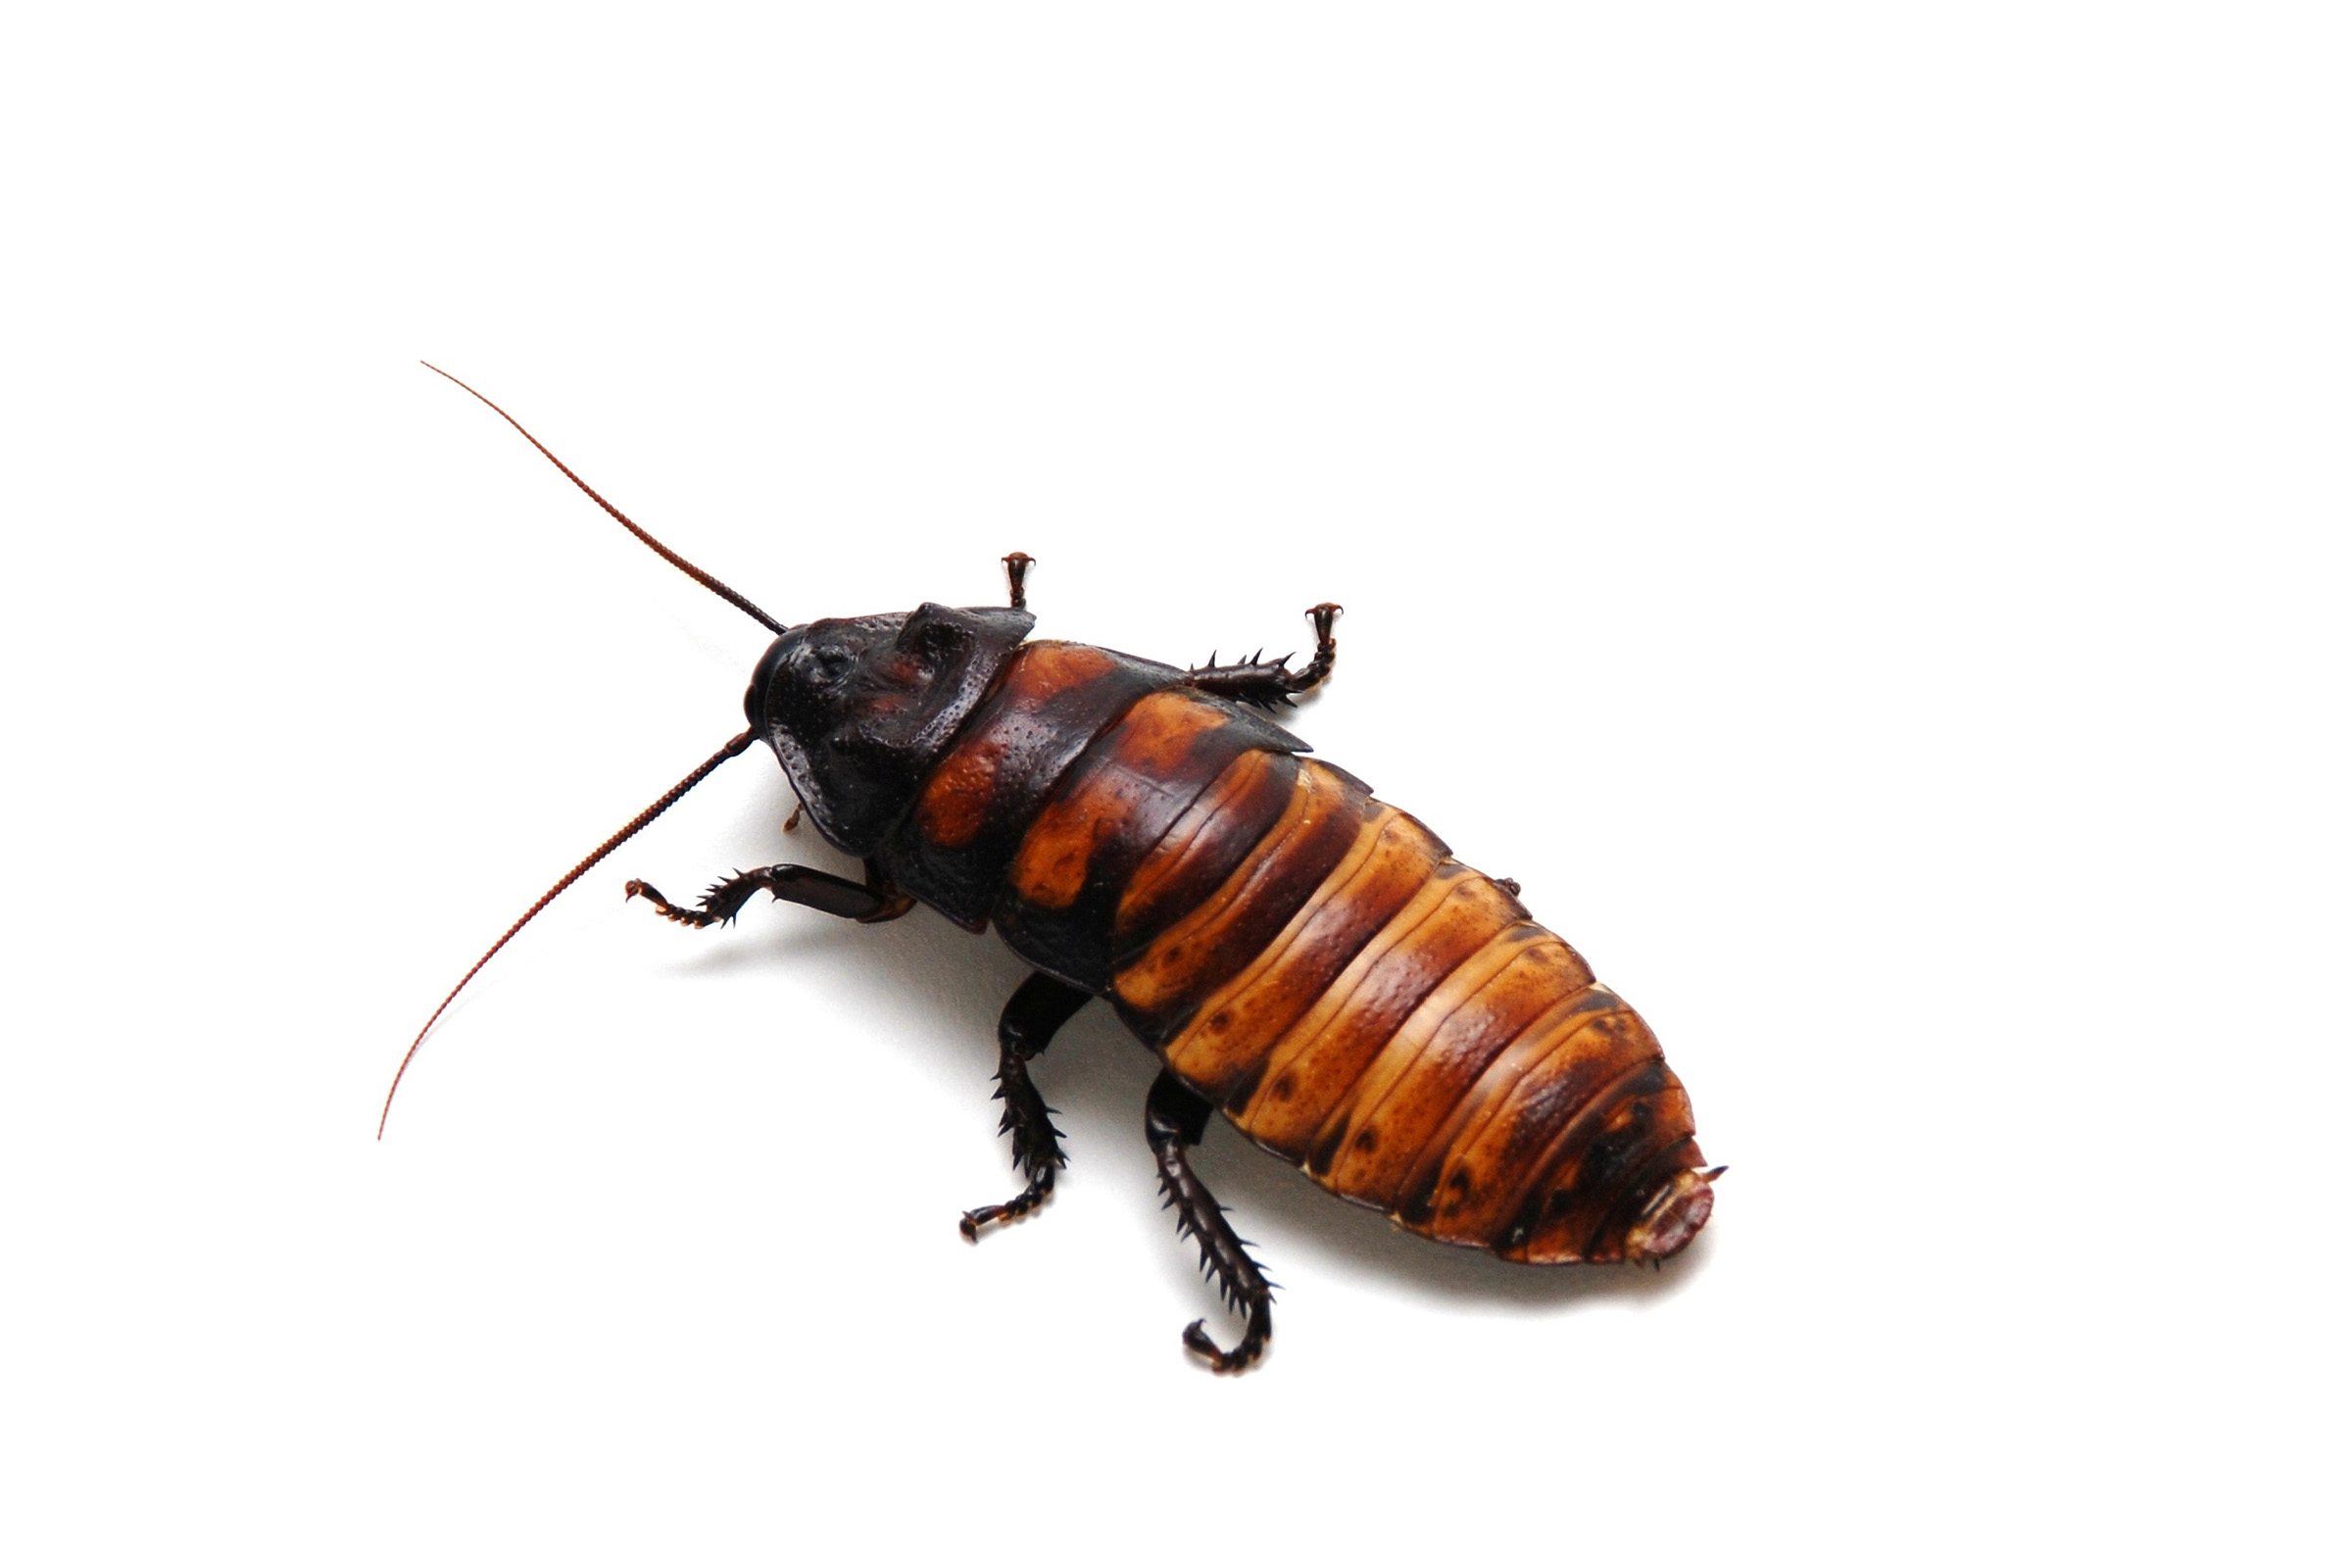 A Madagascar hissing cockroach. (Getty Images)